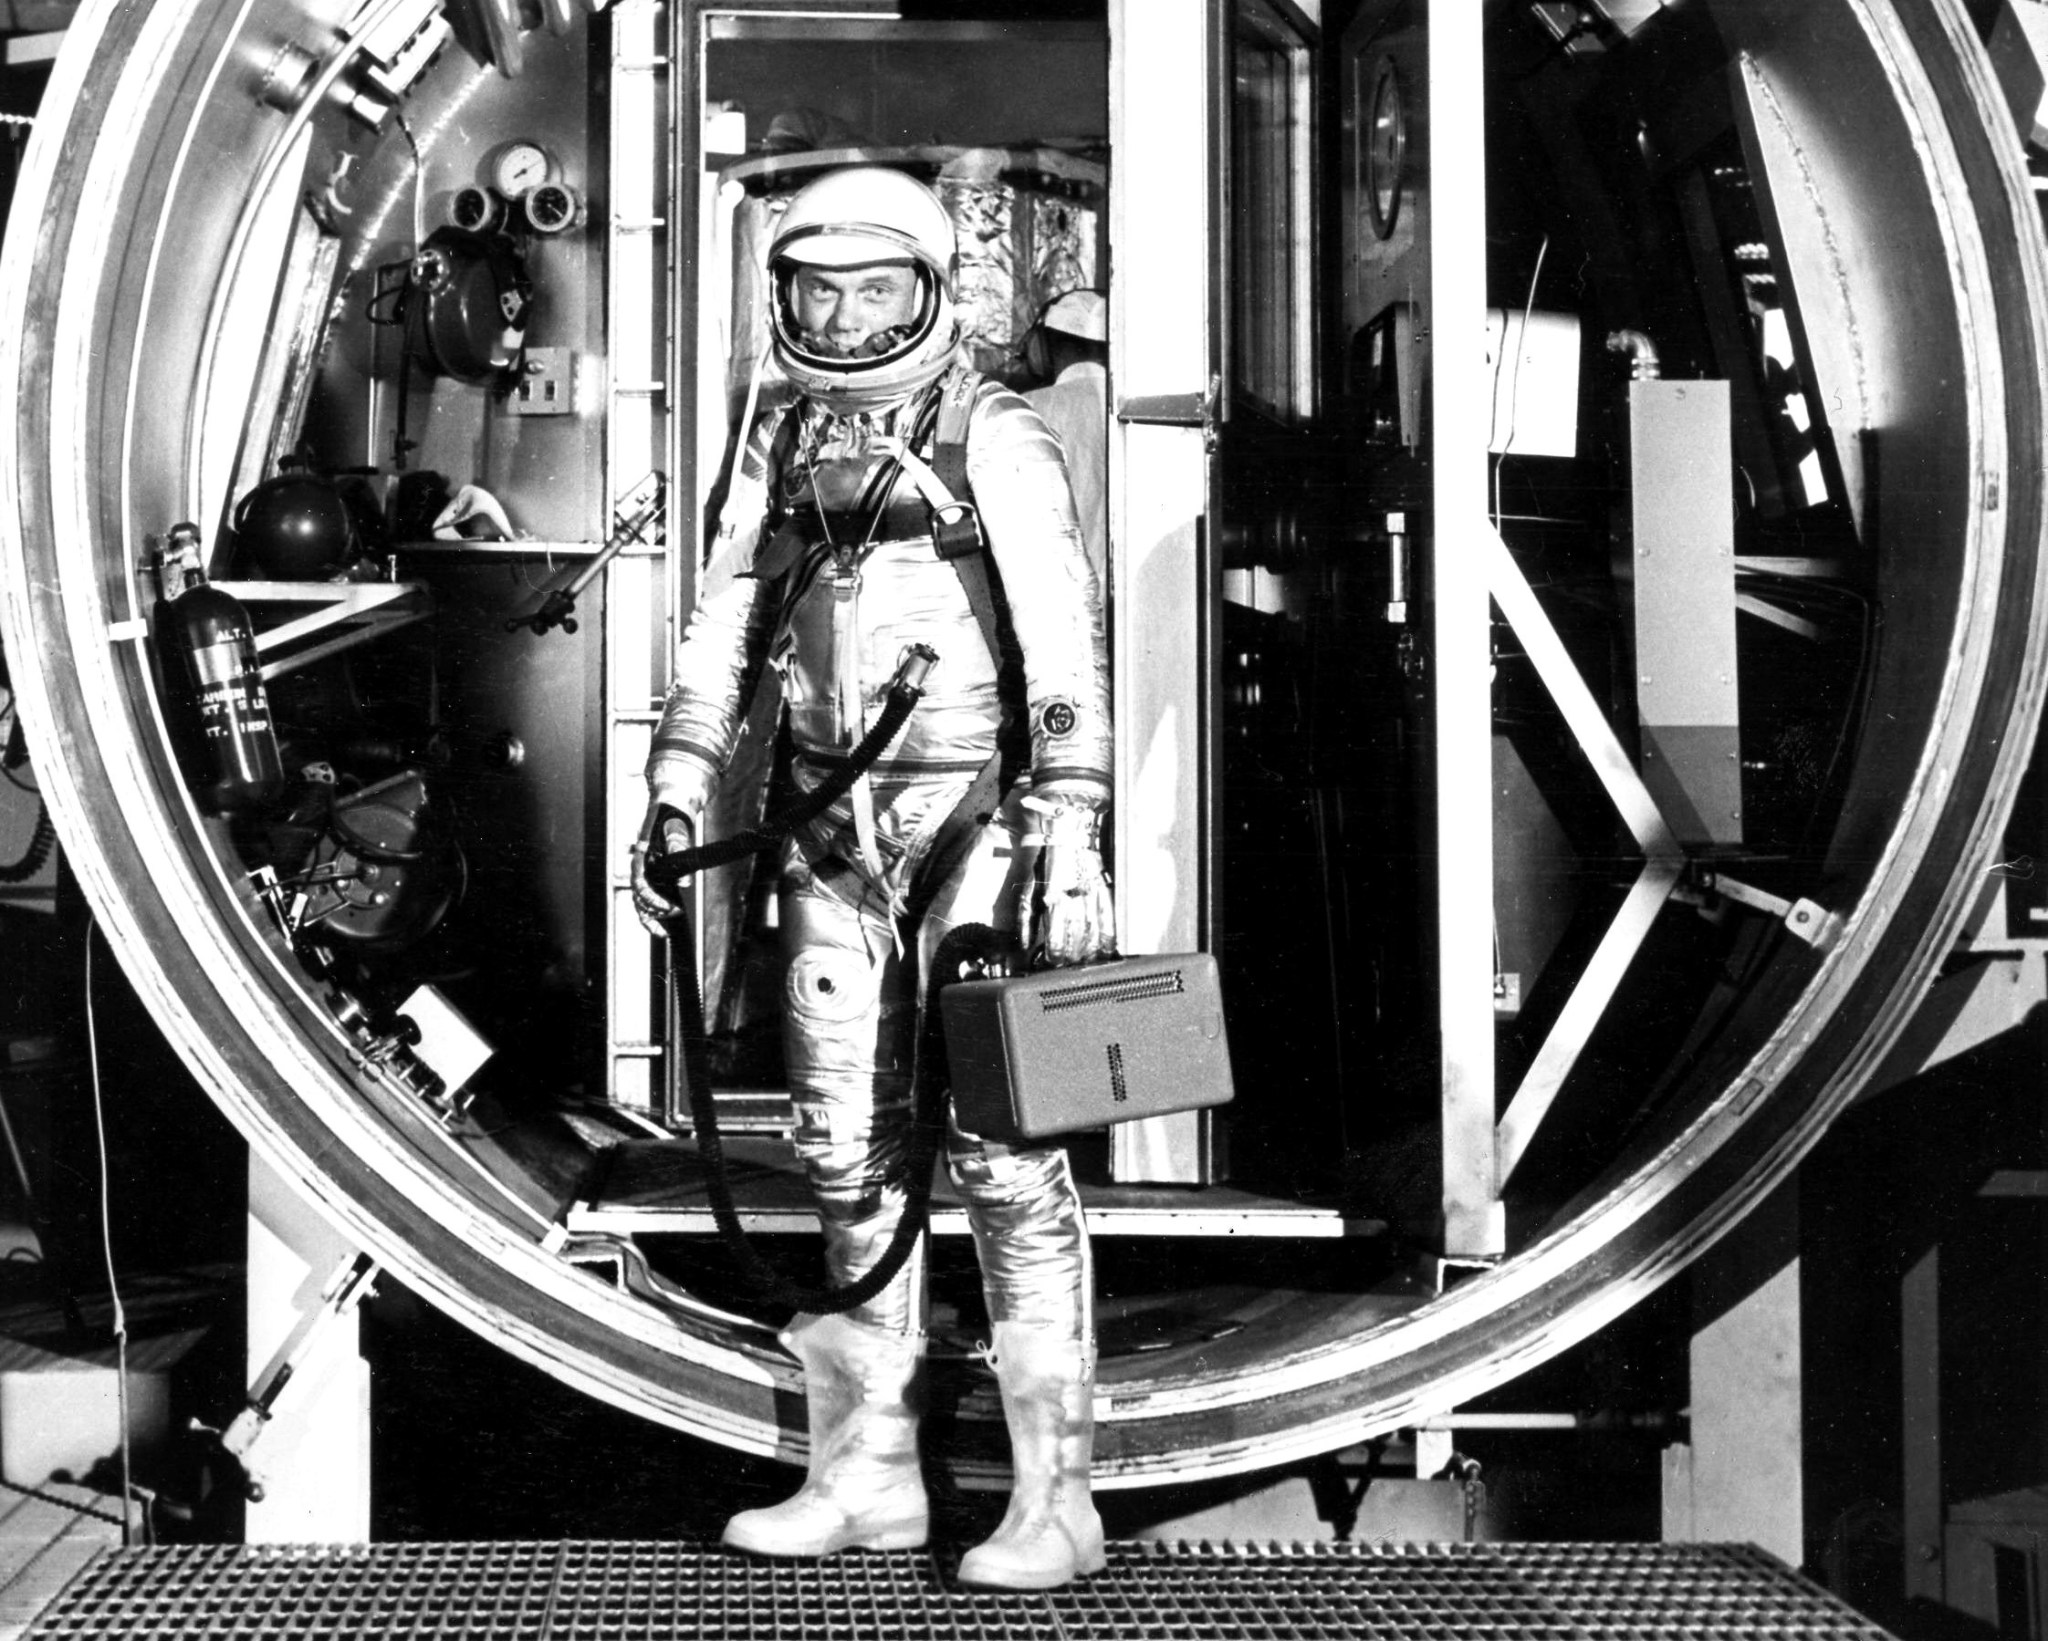 John Glenn is wearing his space suit preparing to board the Mercury spacecraft inside the Hangar S altitude chamber.